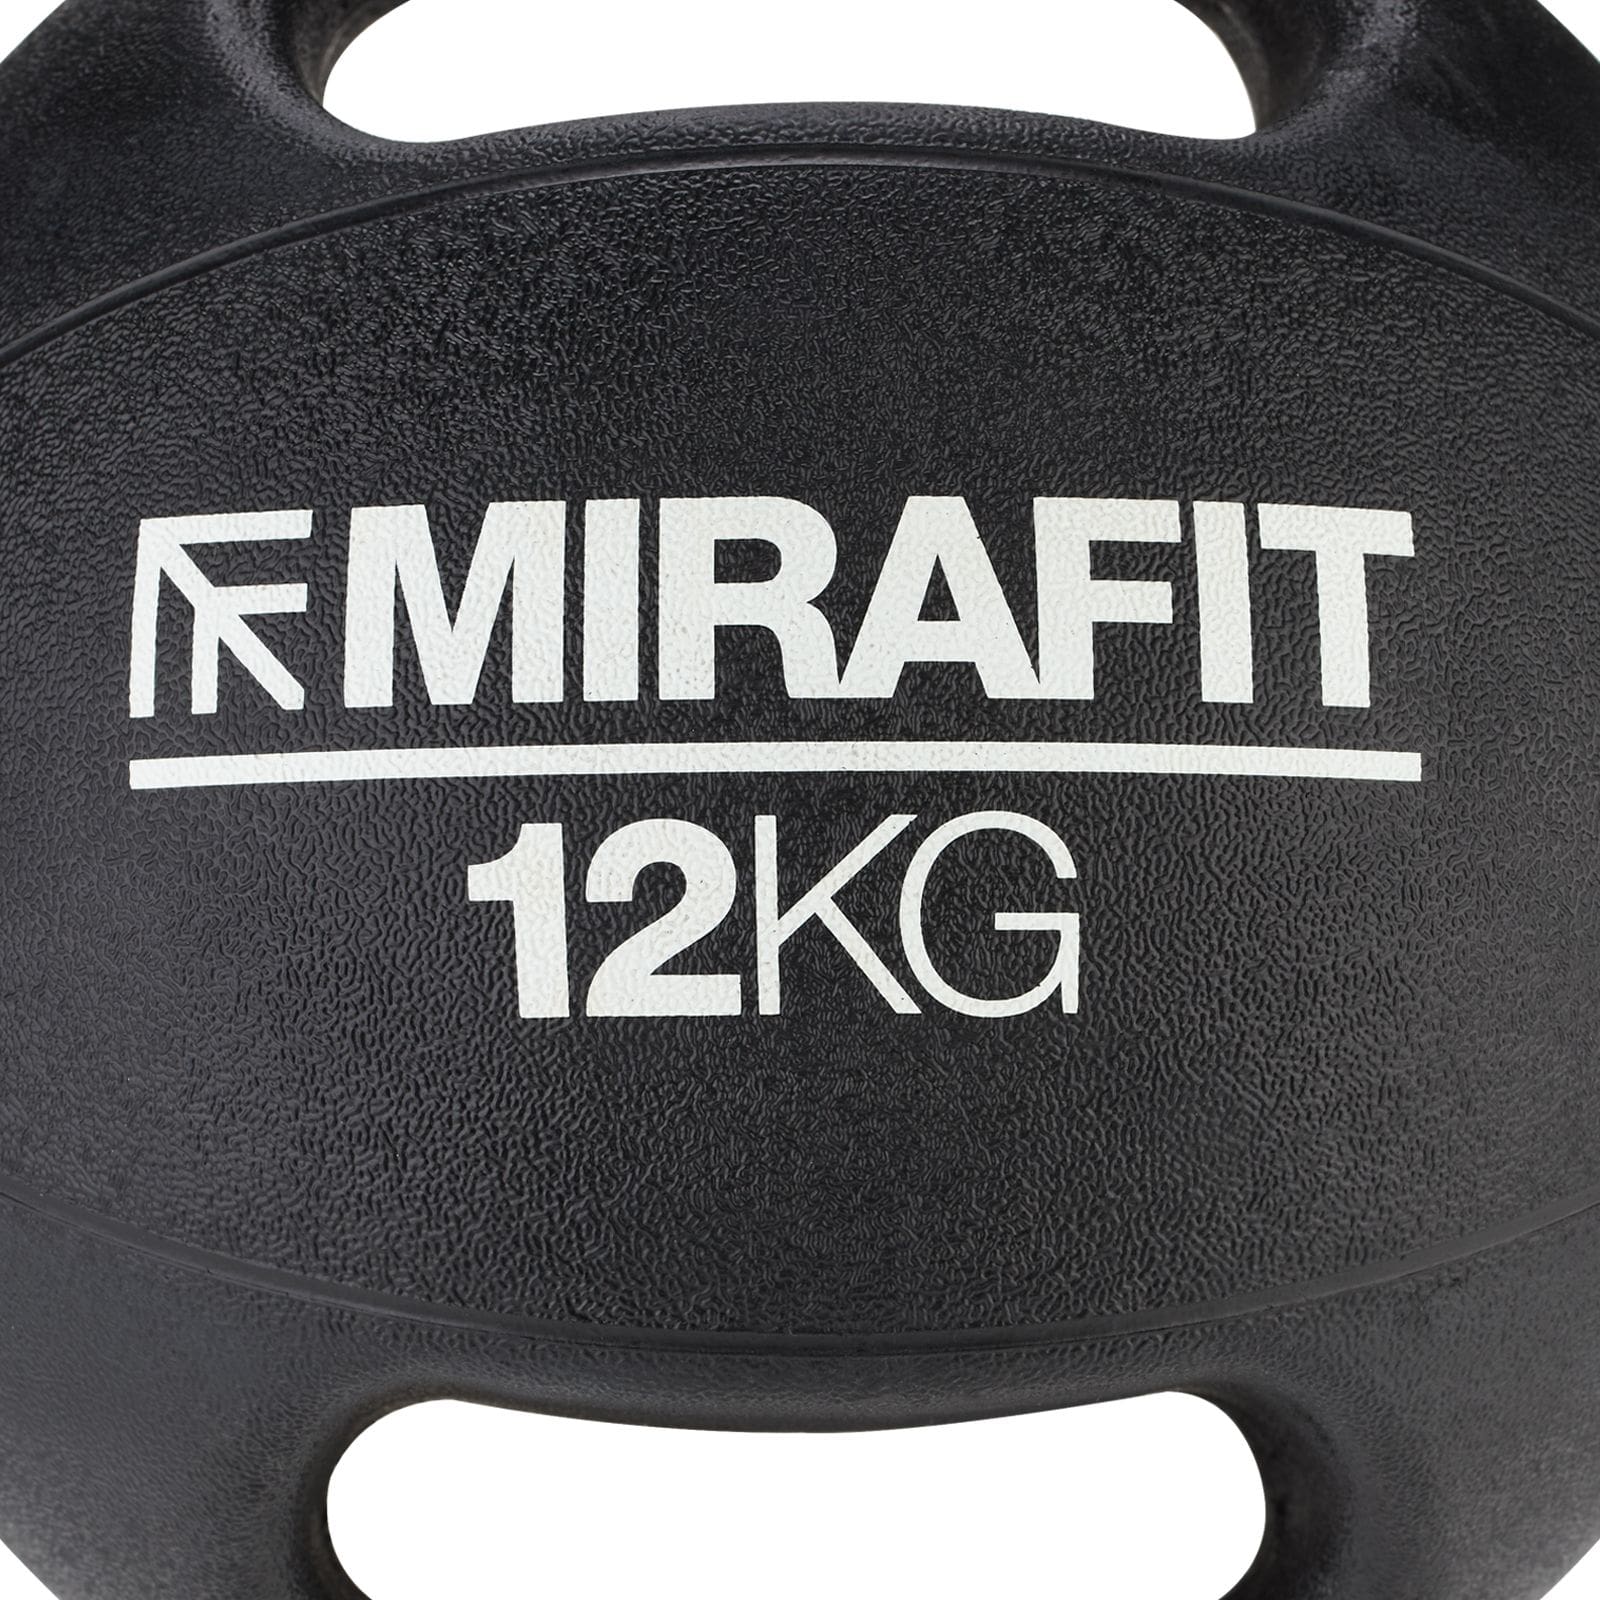 Weights of the Mirafit medicine ball with handles 12kg UK Review